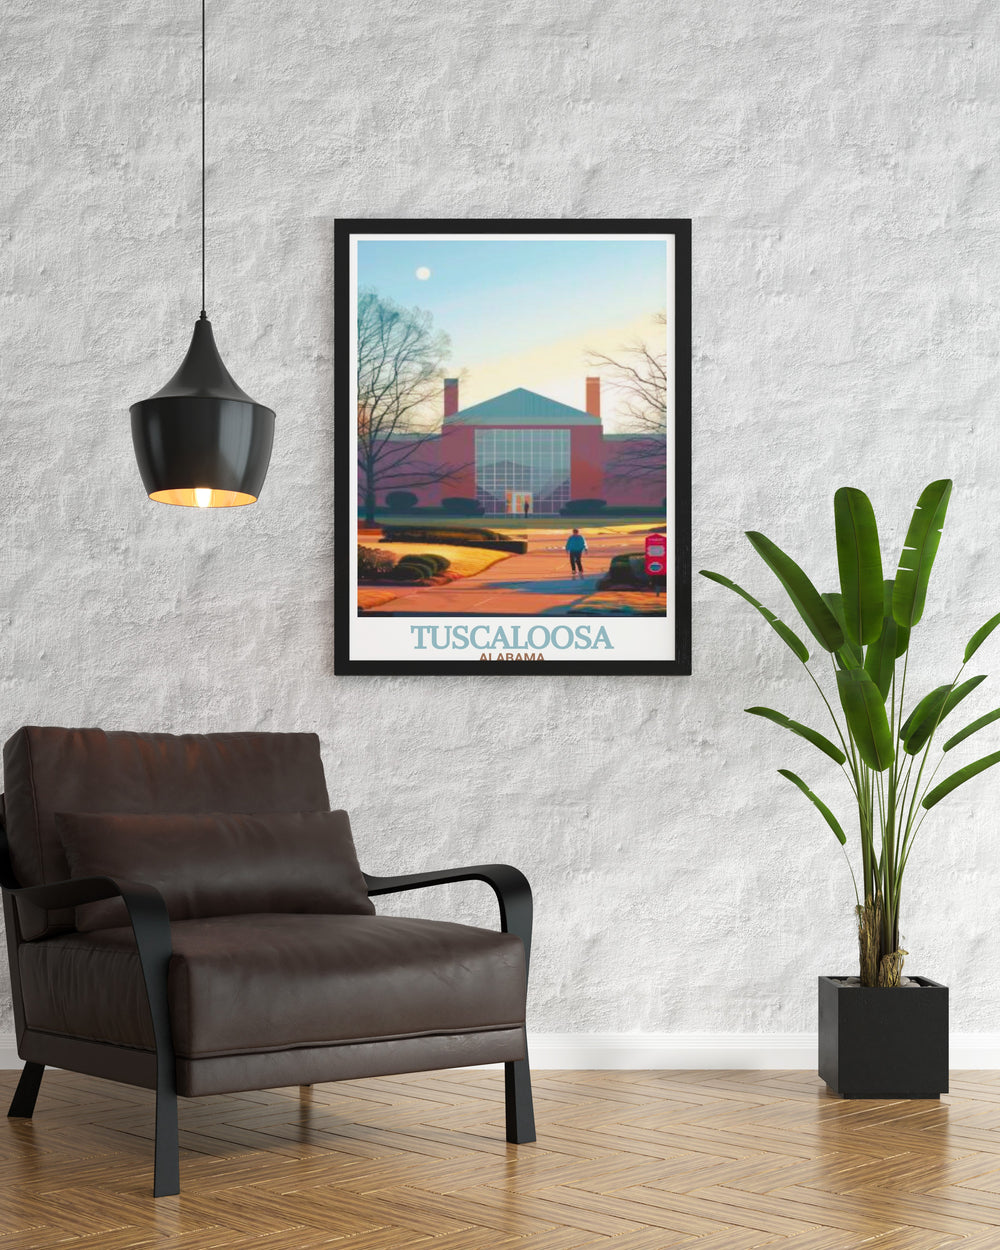 Tuscaloosa Alabama poster showcasing Paul W. Bryant Museum and city map ideal for enhancing your home with elegant Tuscaloosa decor and stunning cityscape artwork making a perfect gift for fans and residents of this beautiful city